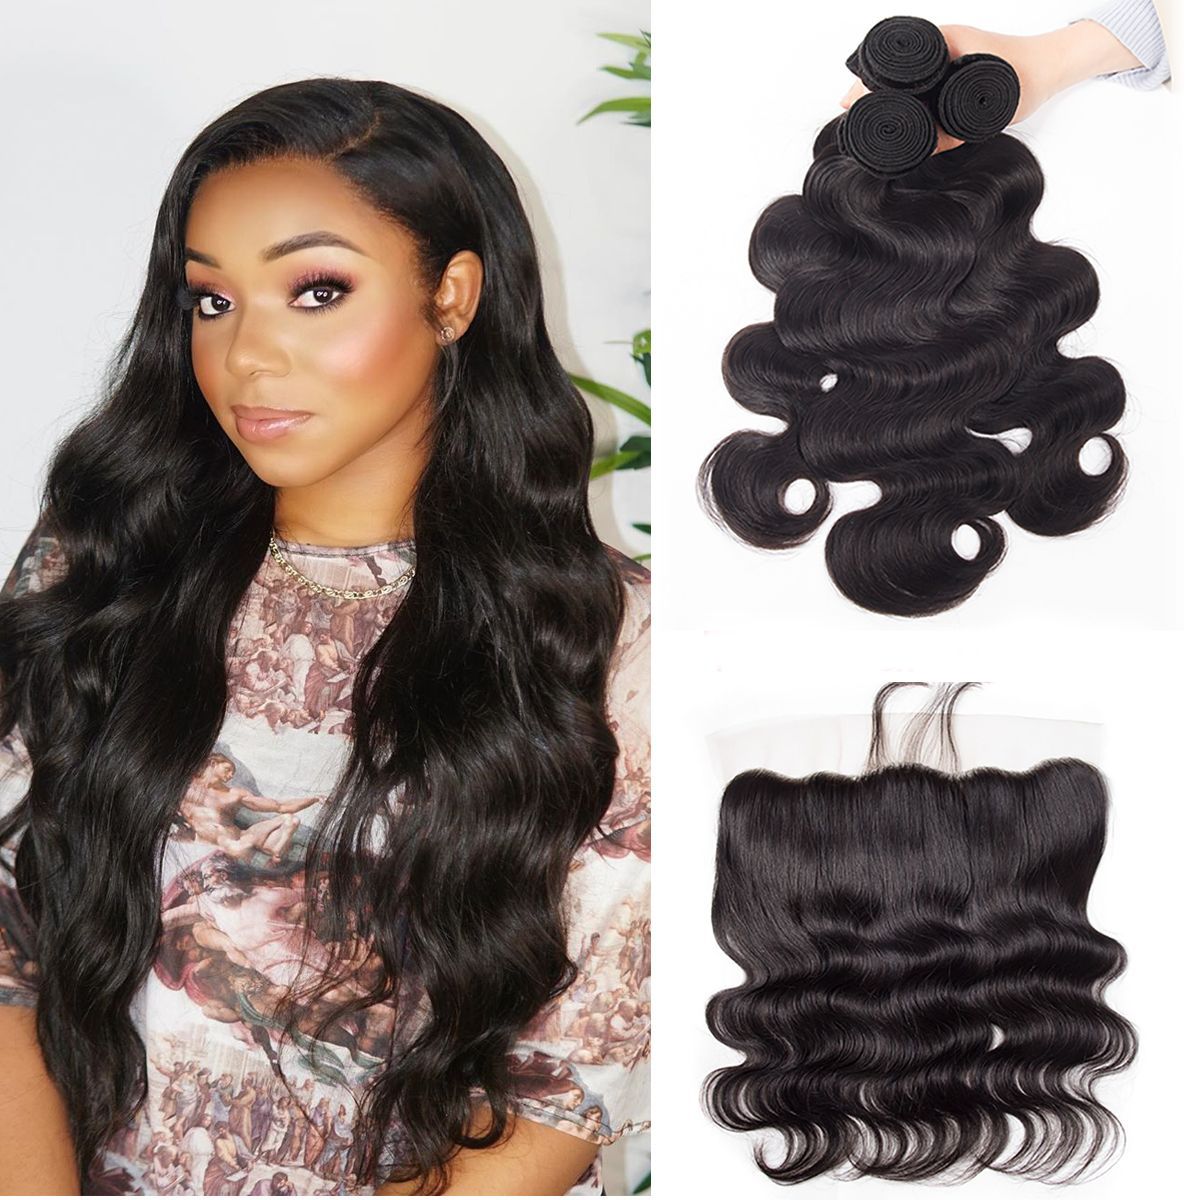 Body Wave Human Hair 3 Bundles with HD Lace Frontal Closure for Full Head